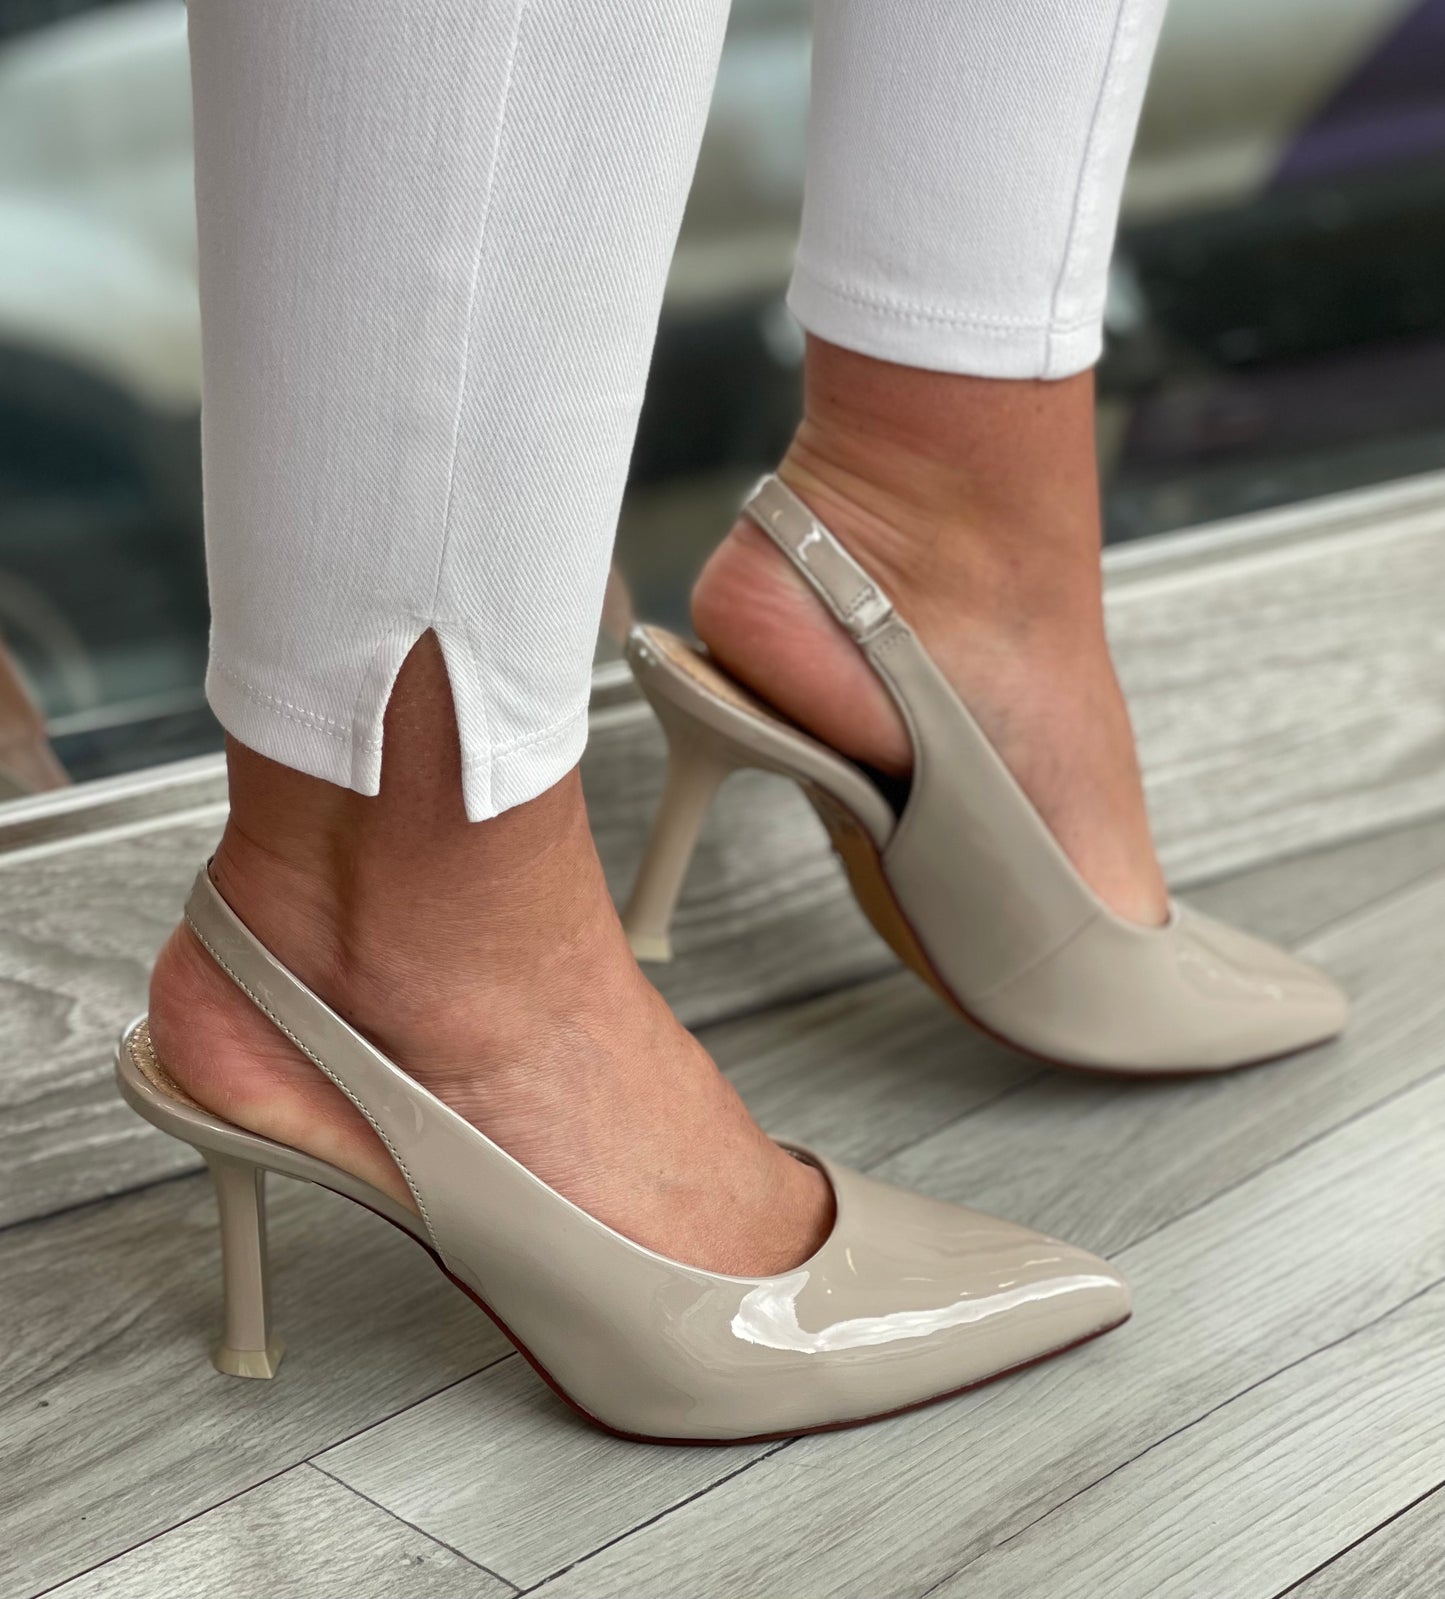 S Oliver - Taupe Patent Slingback